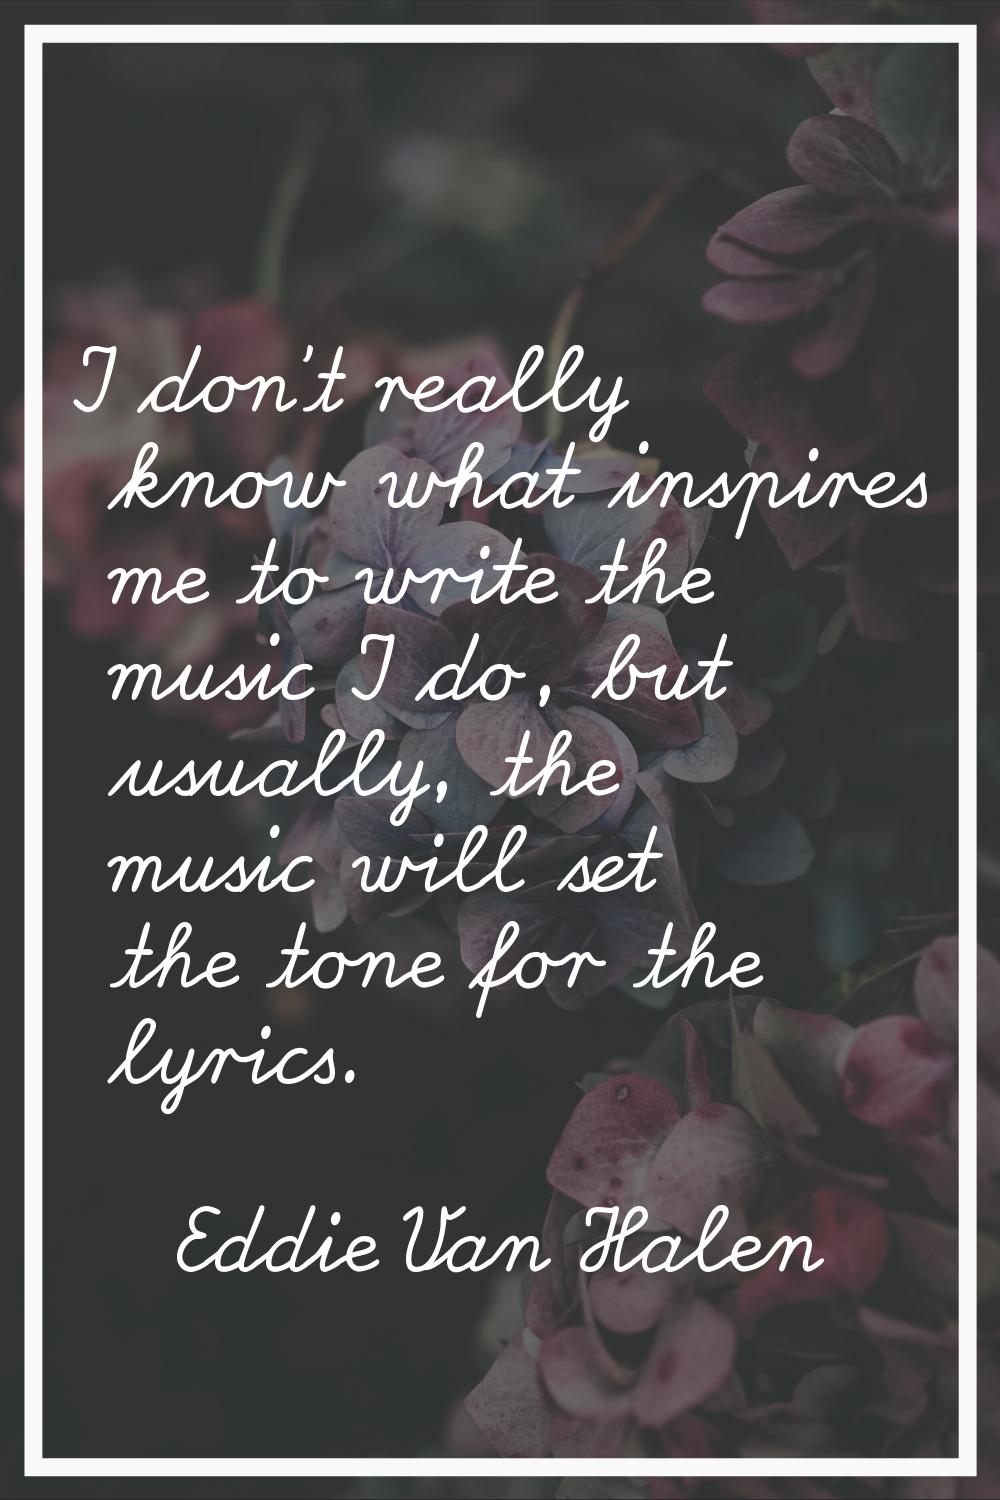 I don't really know what inspires me to write the music I do, but usually, the music will set the t